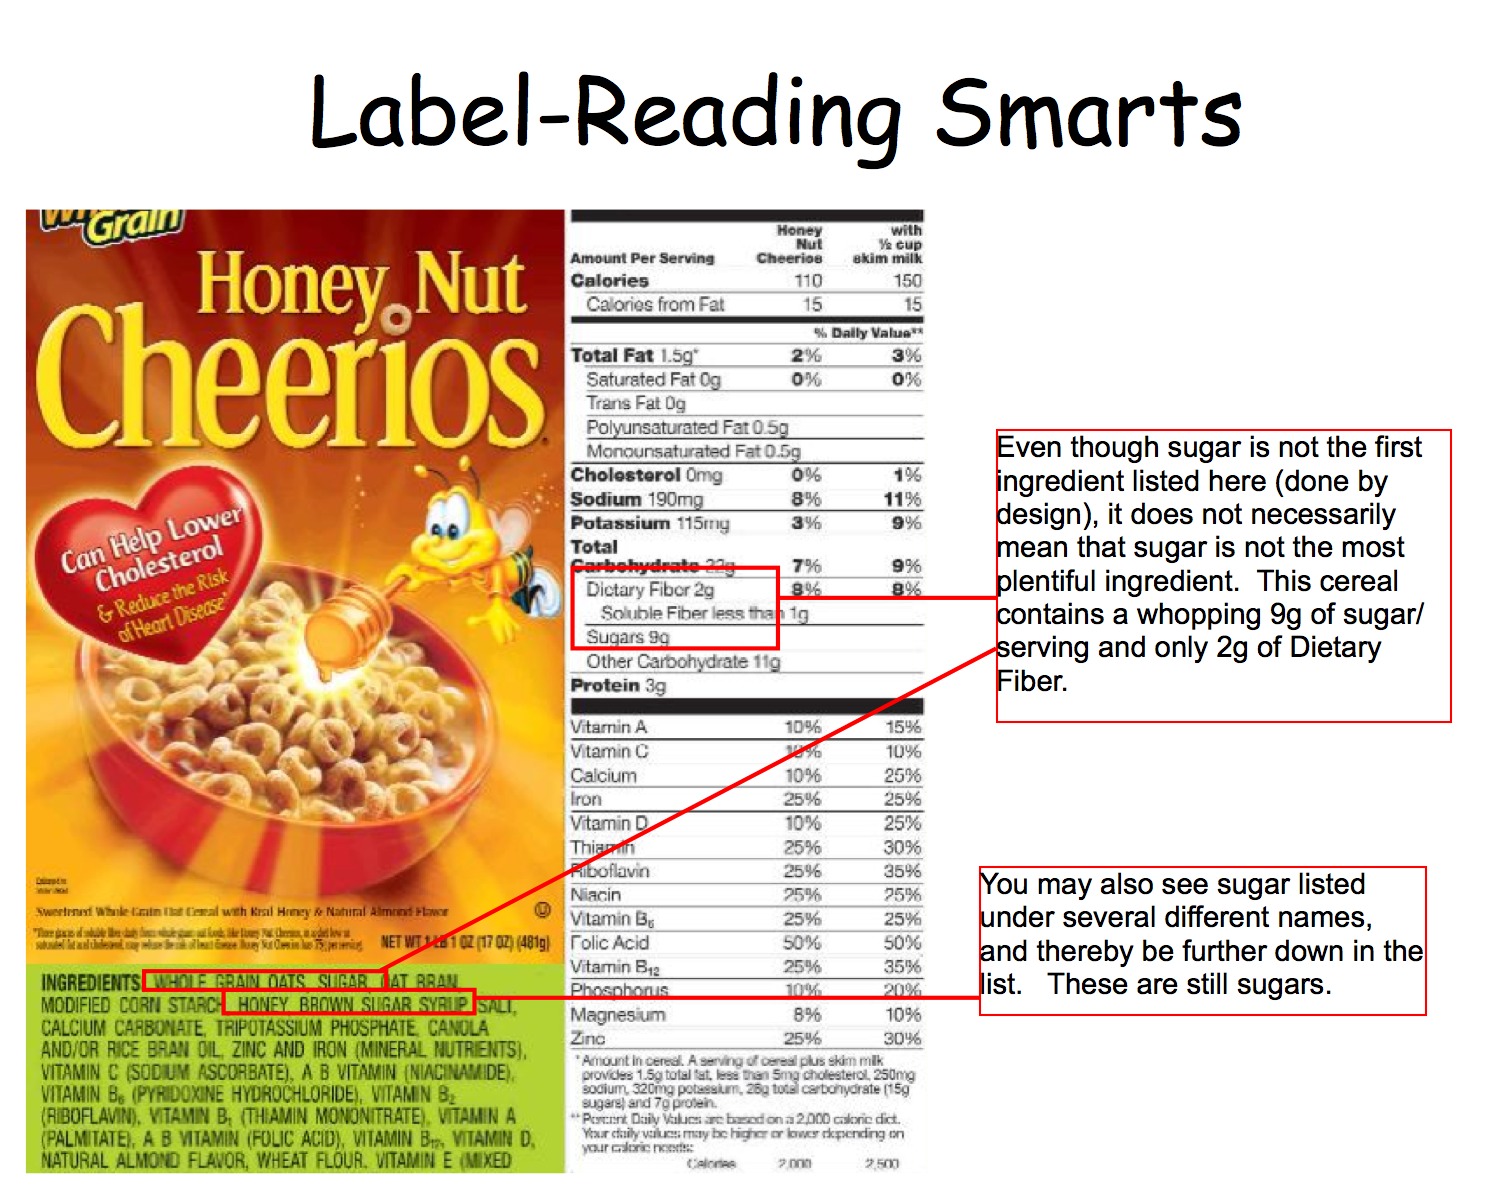 Control the sugar addiction by becoming a smart label-reader, as seen here on a box of cereal.